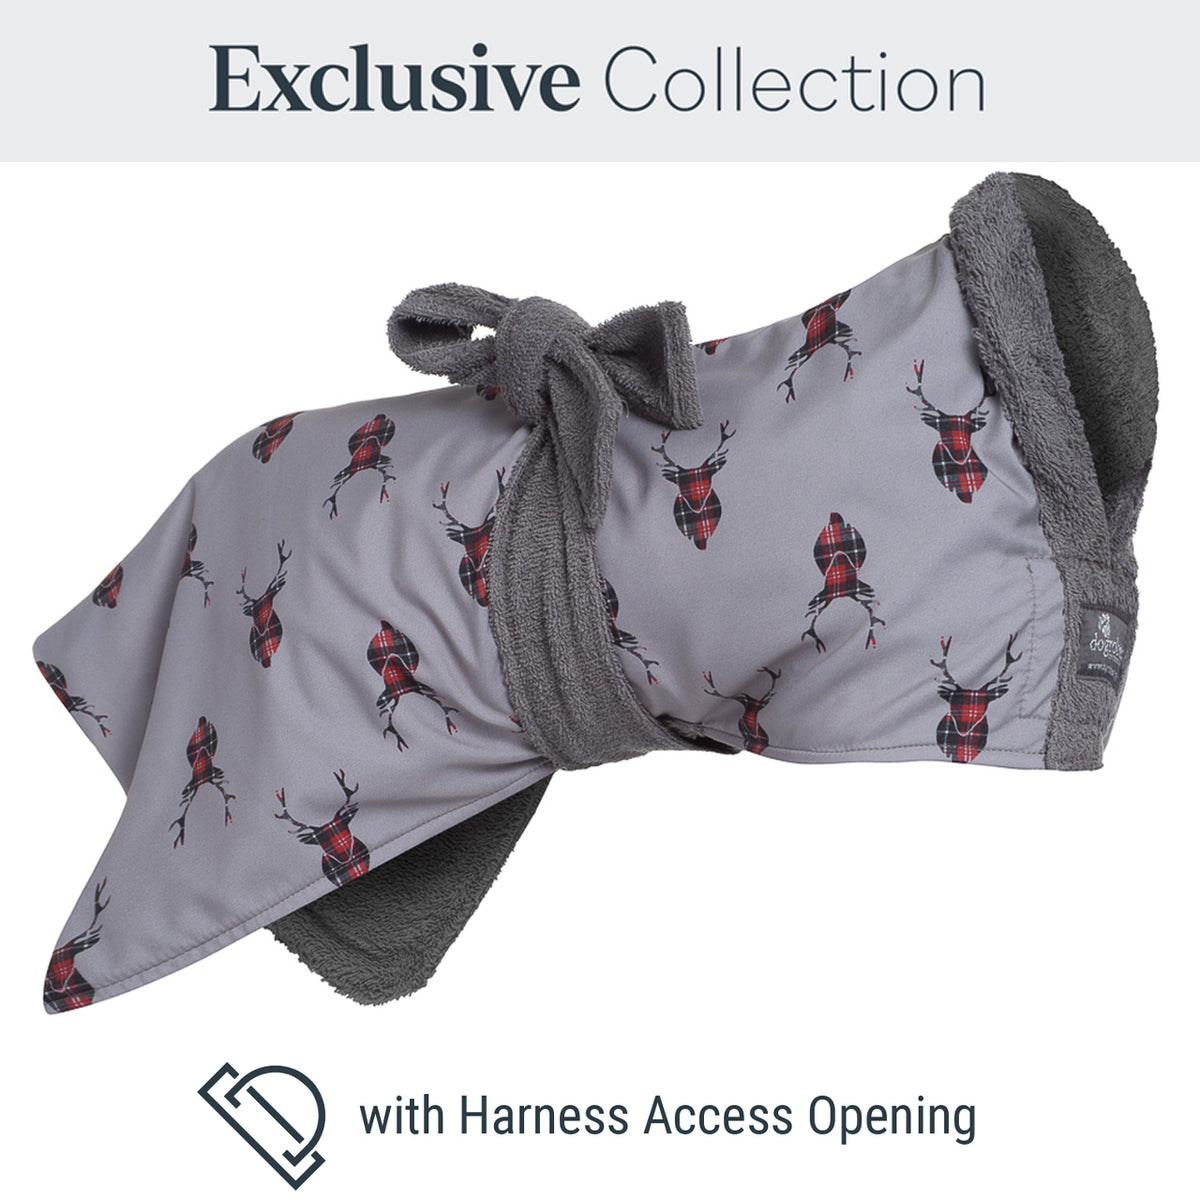 Exclusive collection DogRobe drying coat, with harness access opening in Stag Head pattern.